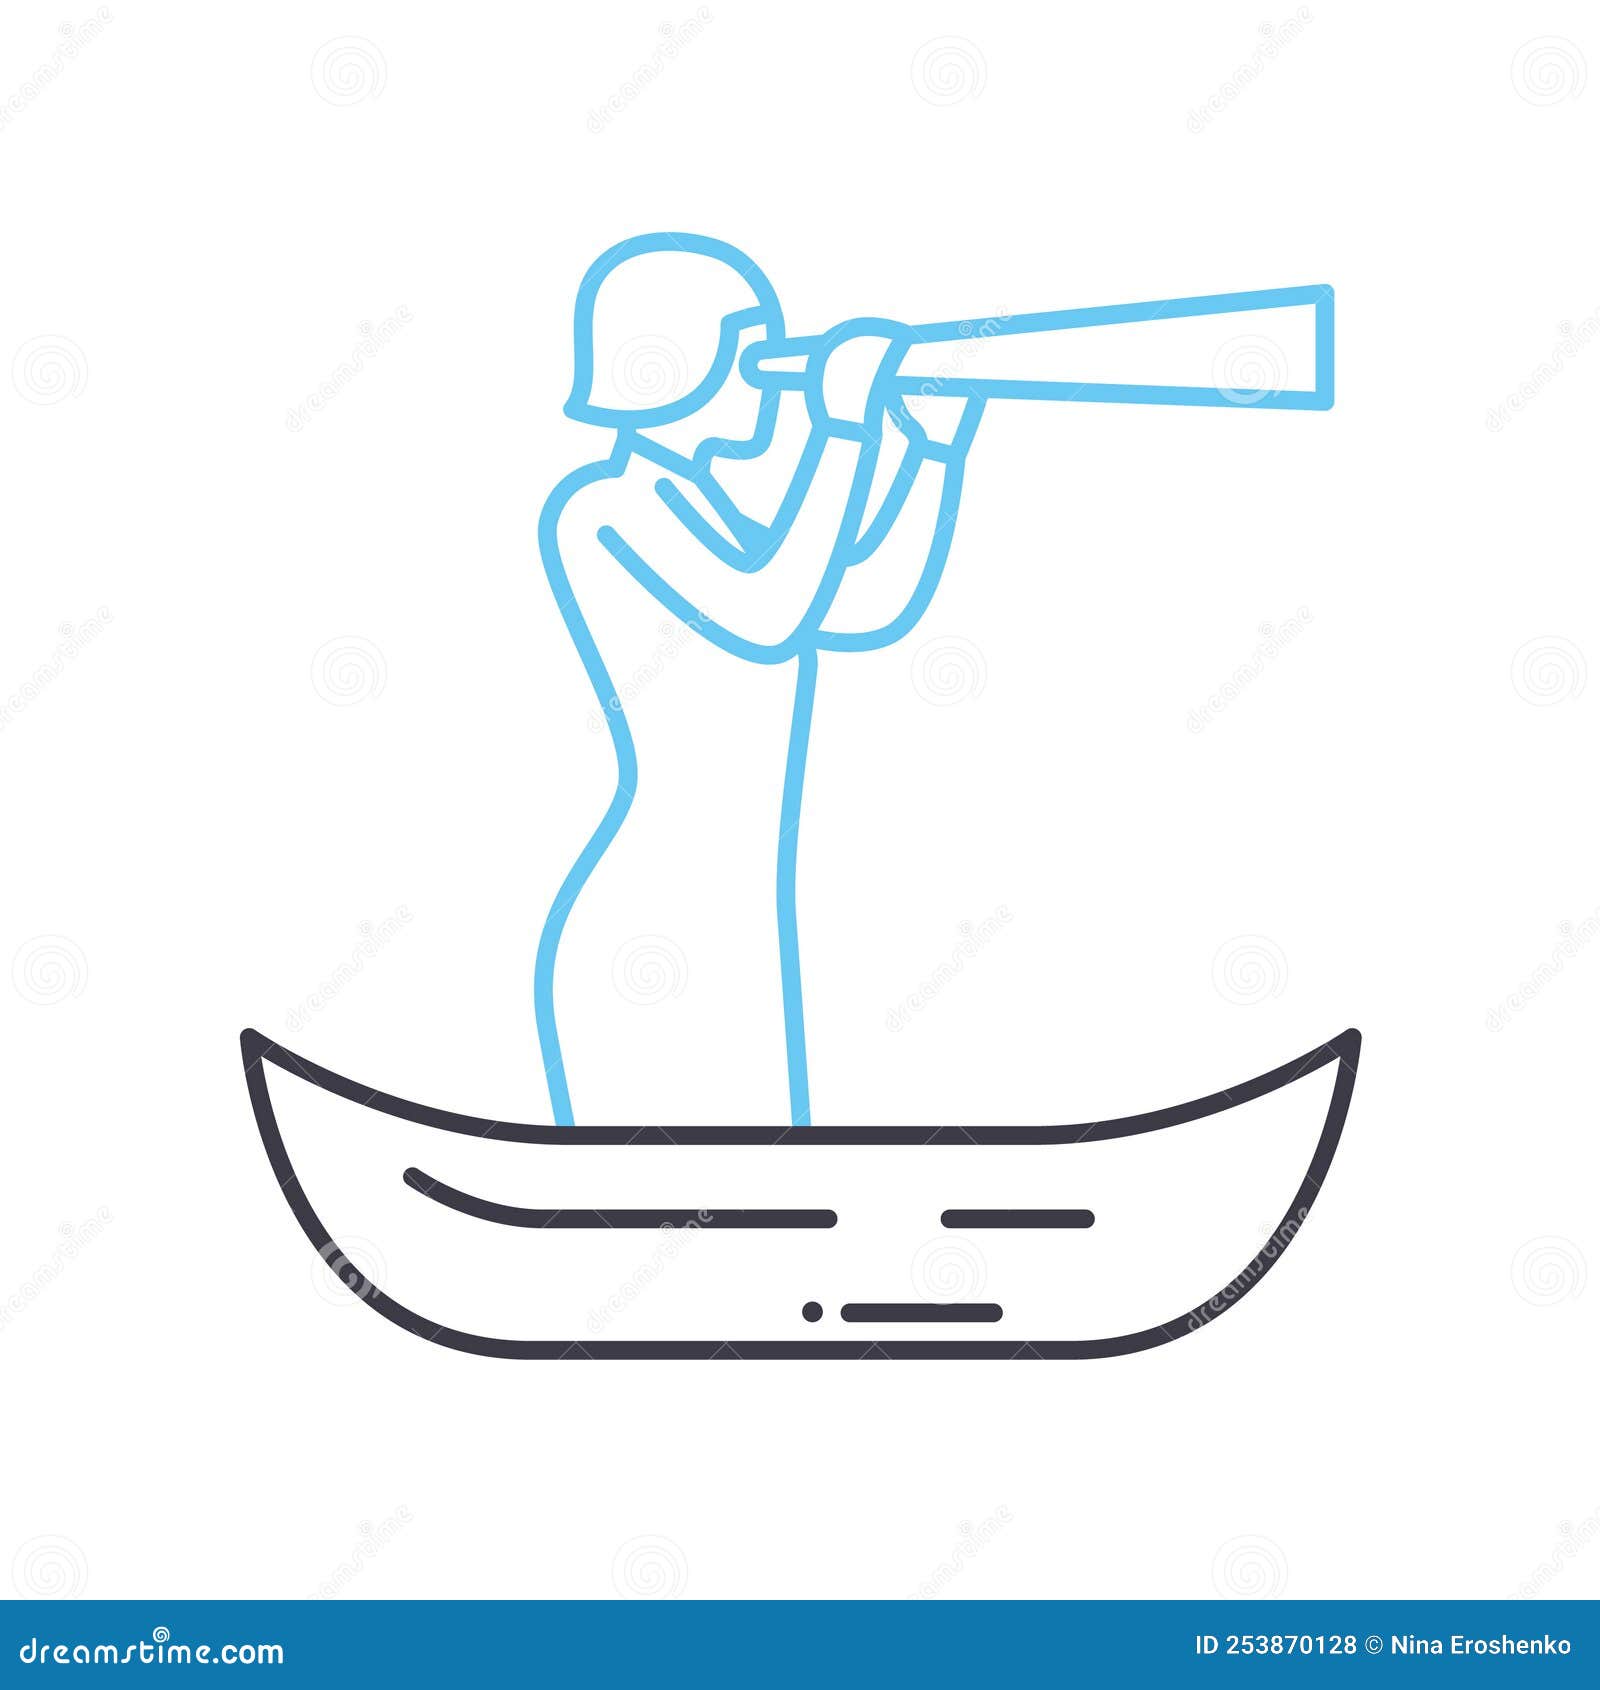 Visionary Leader Line Icon, Outline Symbol, Vector Illustration, Concept  Sign Stock Vector - Illustration of think, metaphor: 253870128